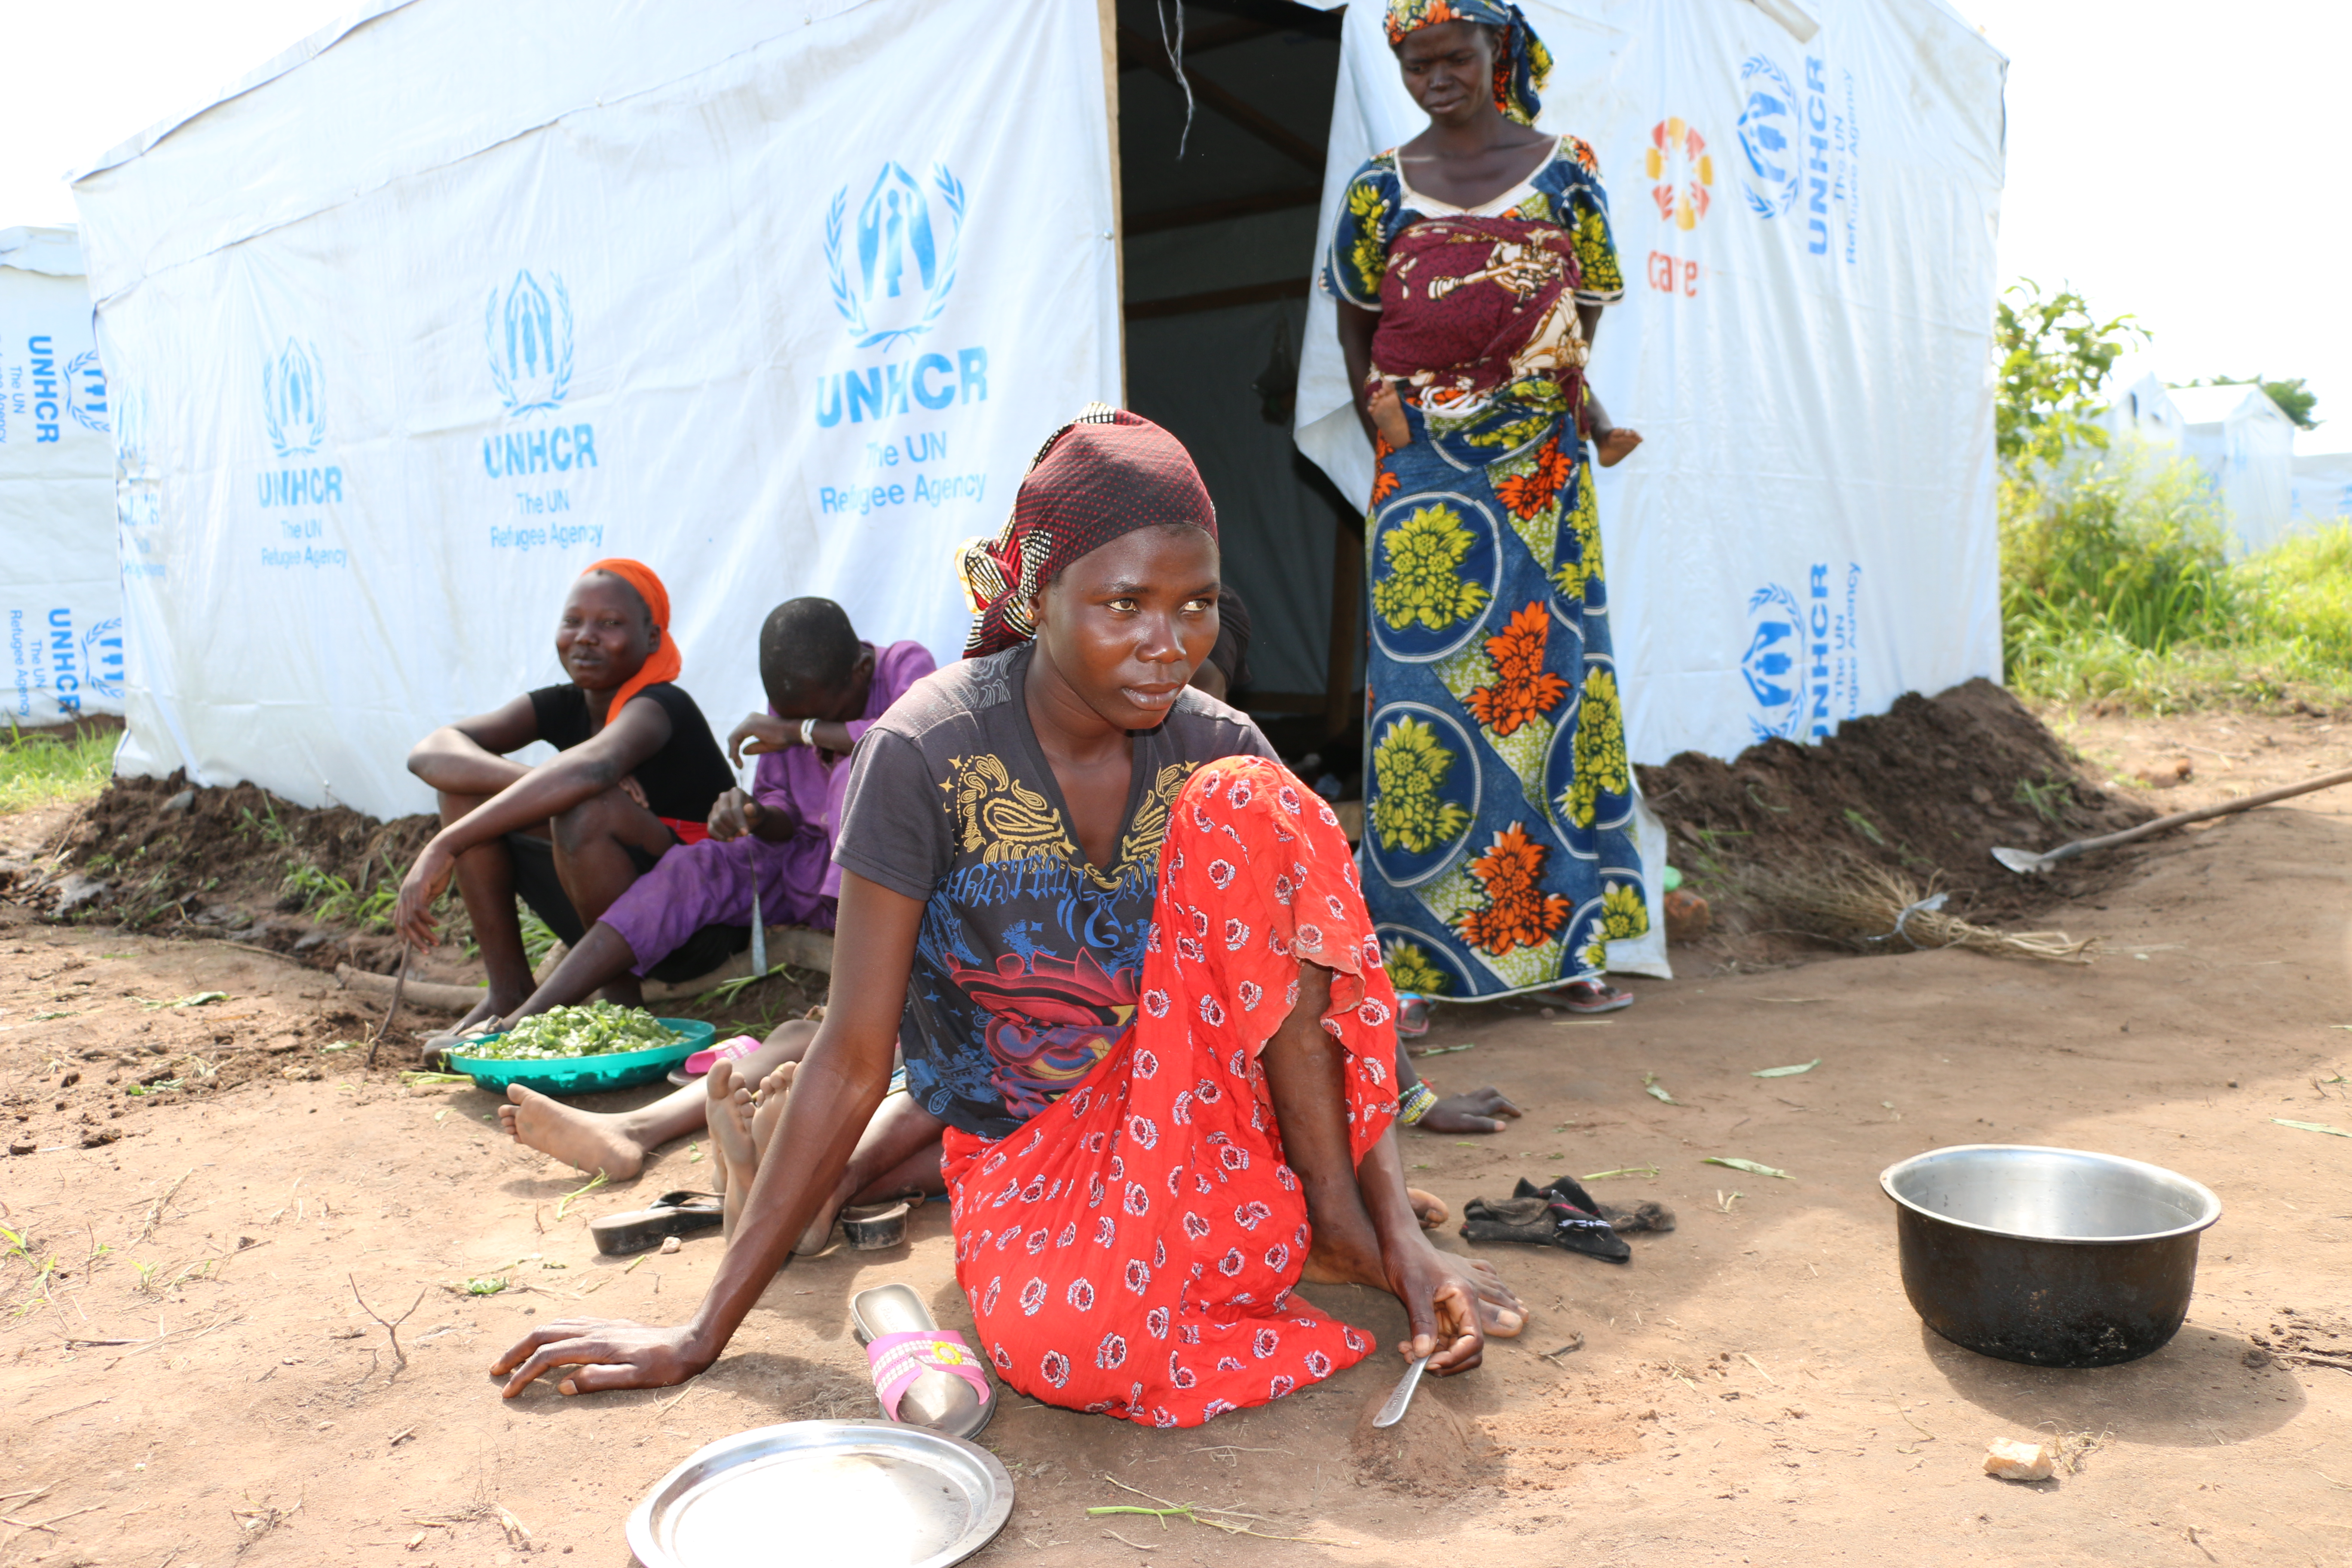 Displaced by conflicts, hit by food shortage